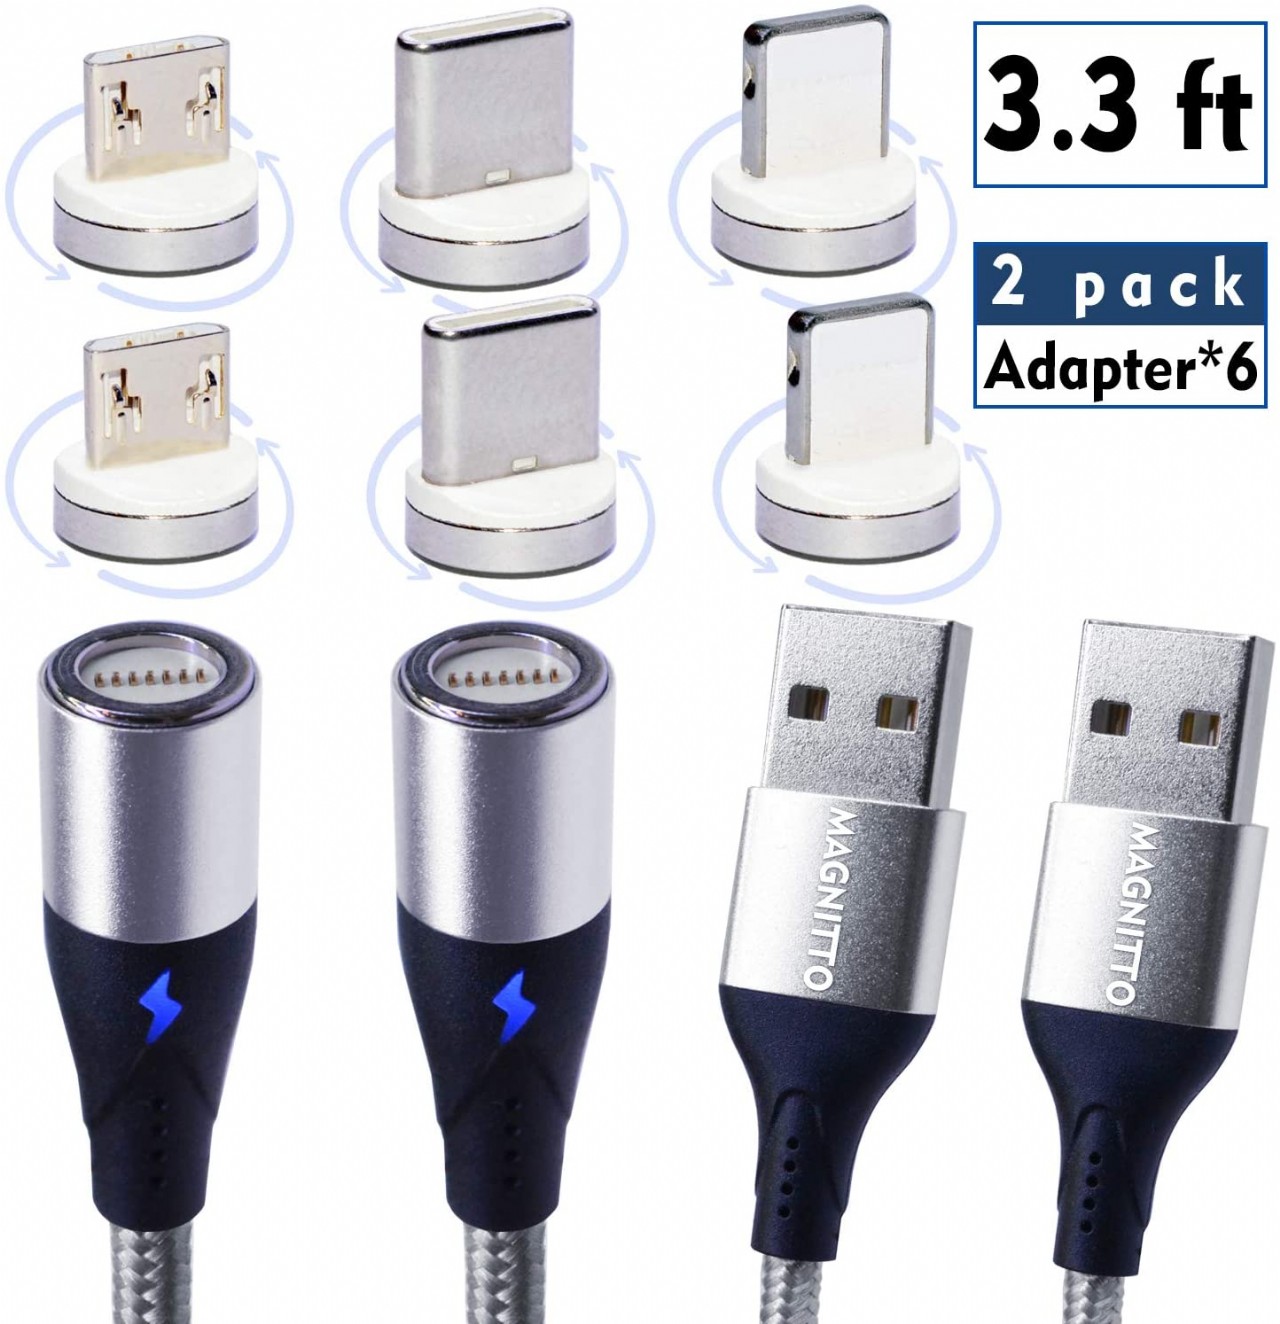 Multi Charging Cable, Magnetic Multi Charger Adapter 3FT Nylon Braided Universal 3 in 1 Multiple USB